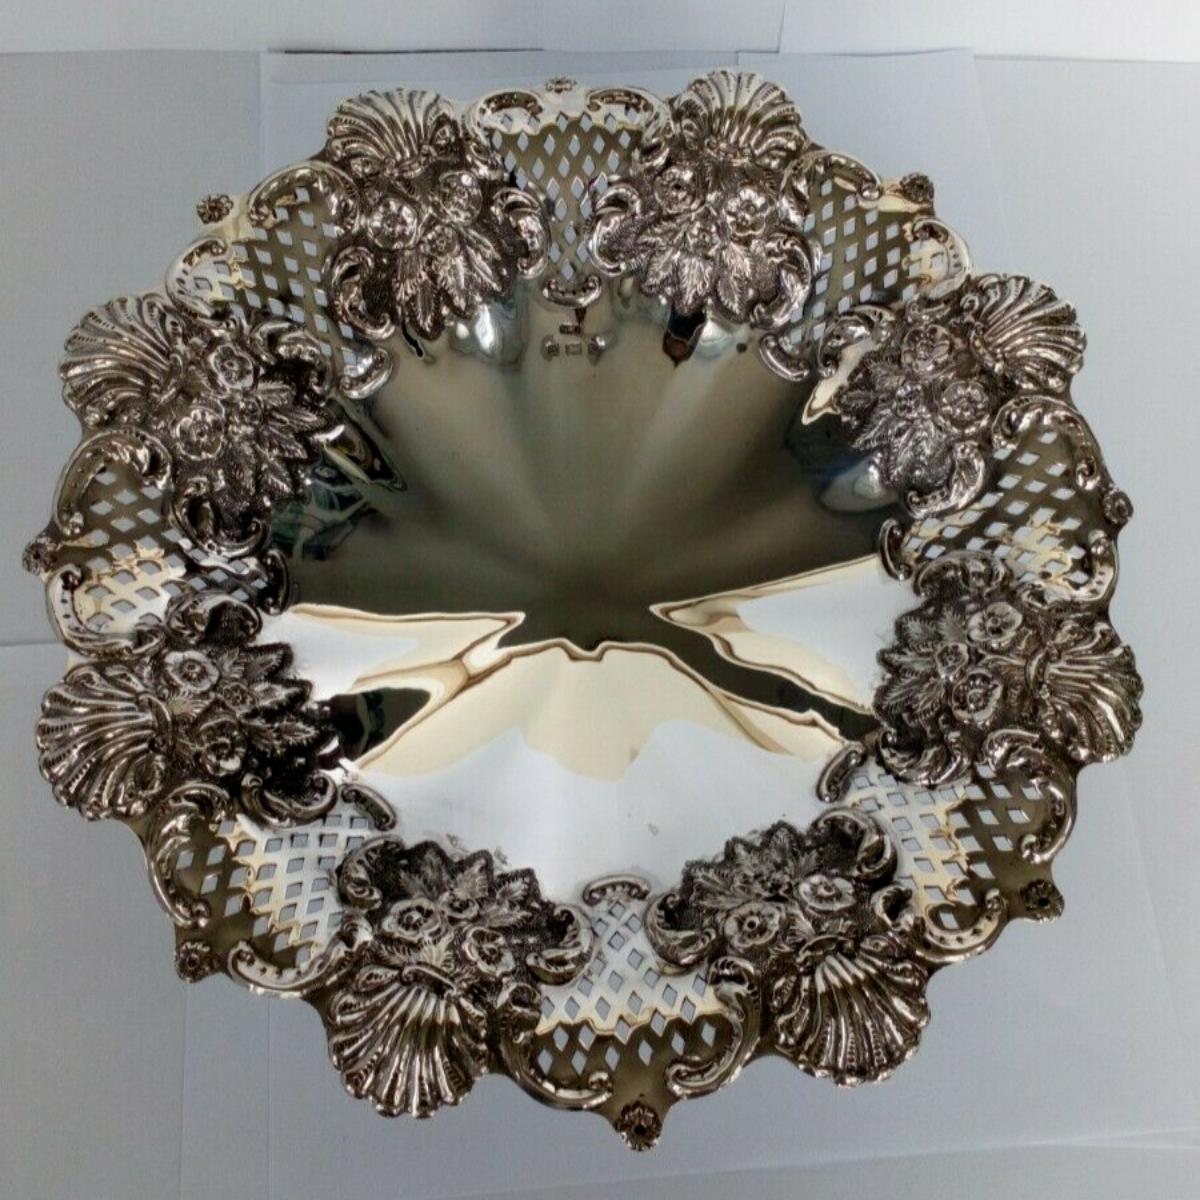 Sterling Silver Pierced Fruit Bowl by William Devenport in Birmingham in 1901

In good condition, this is a lovely piece. It has intricate pierced metalwork. It is decorated with flowers, flourishing leaves and shells. It would look lovely on any